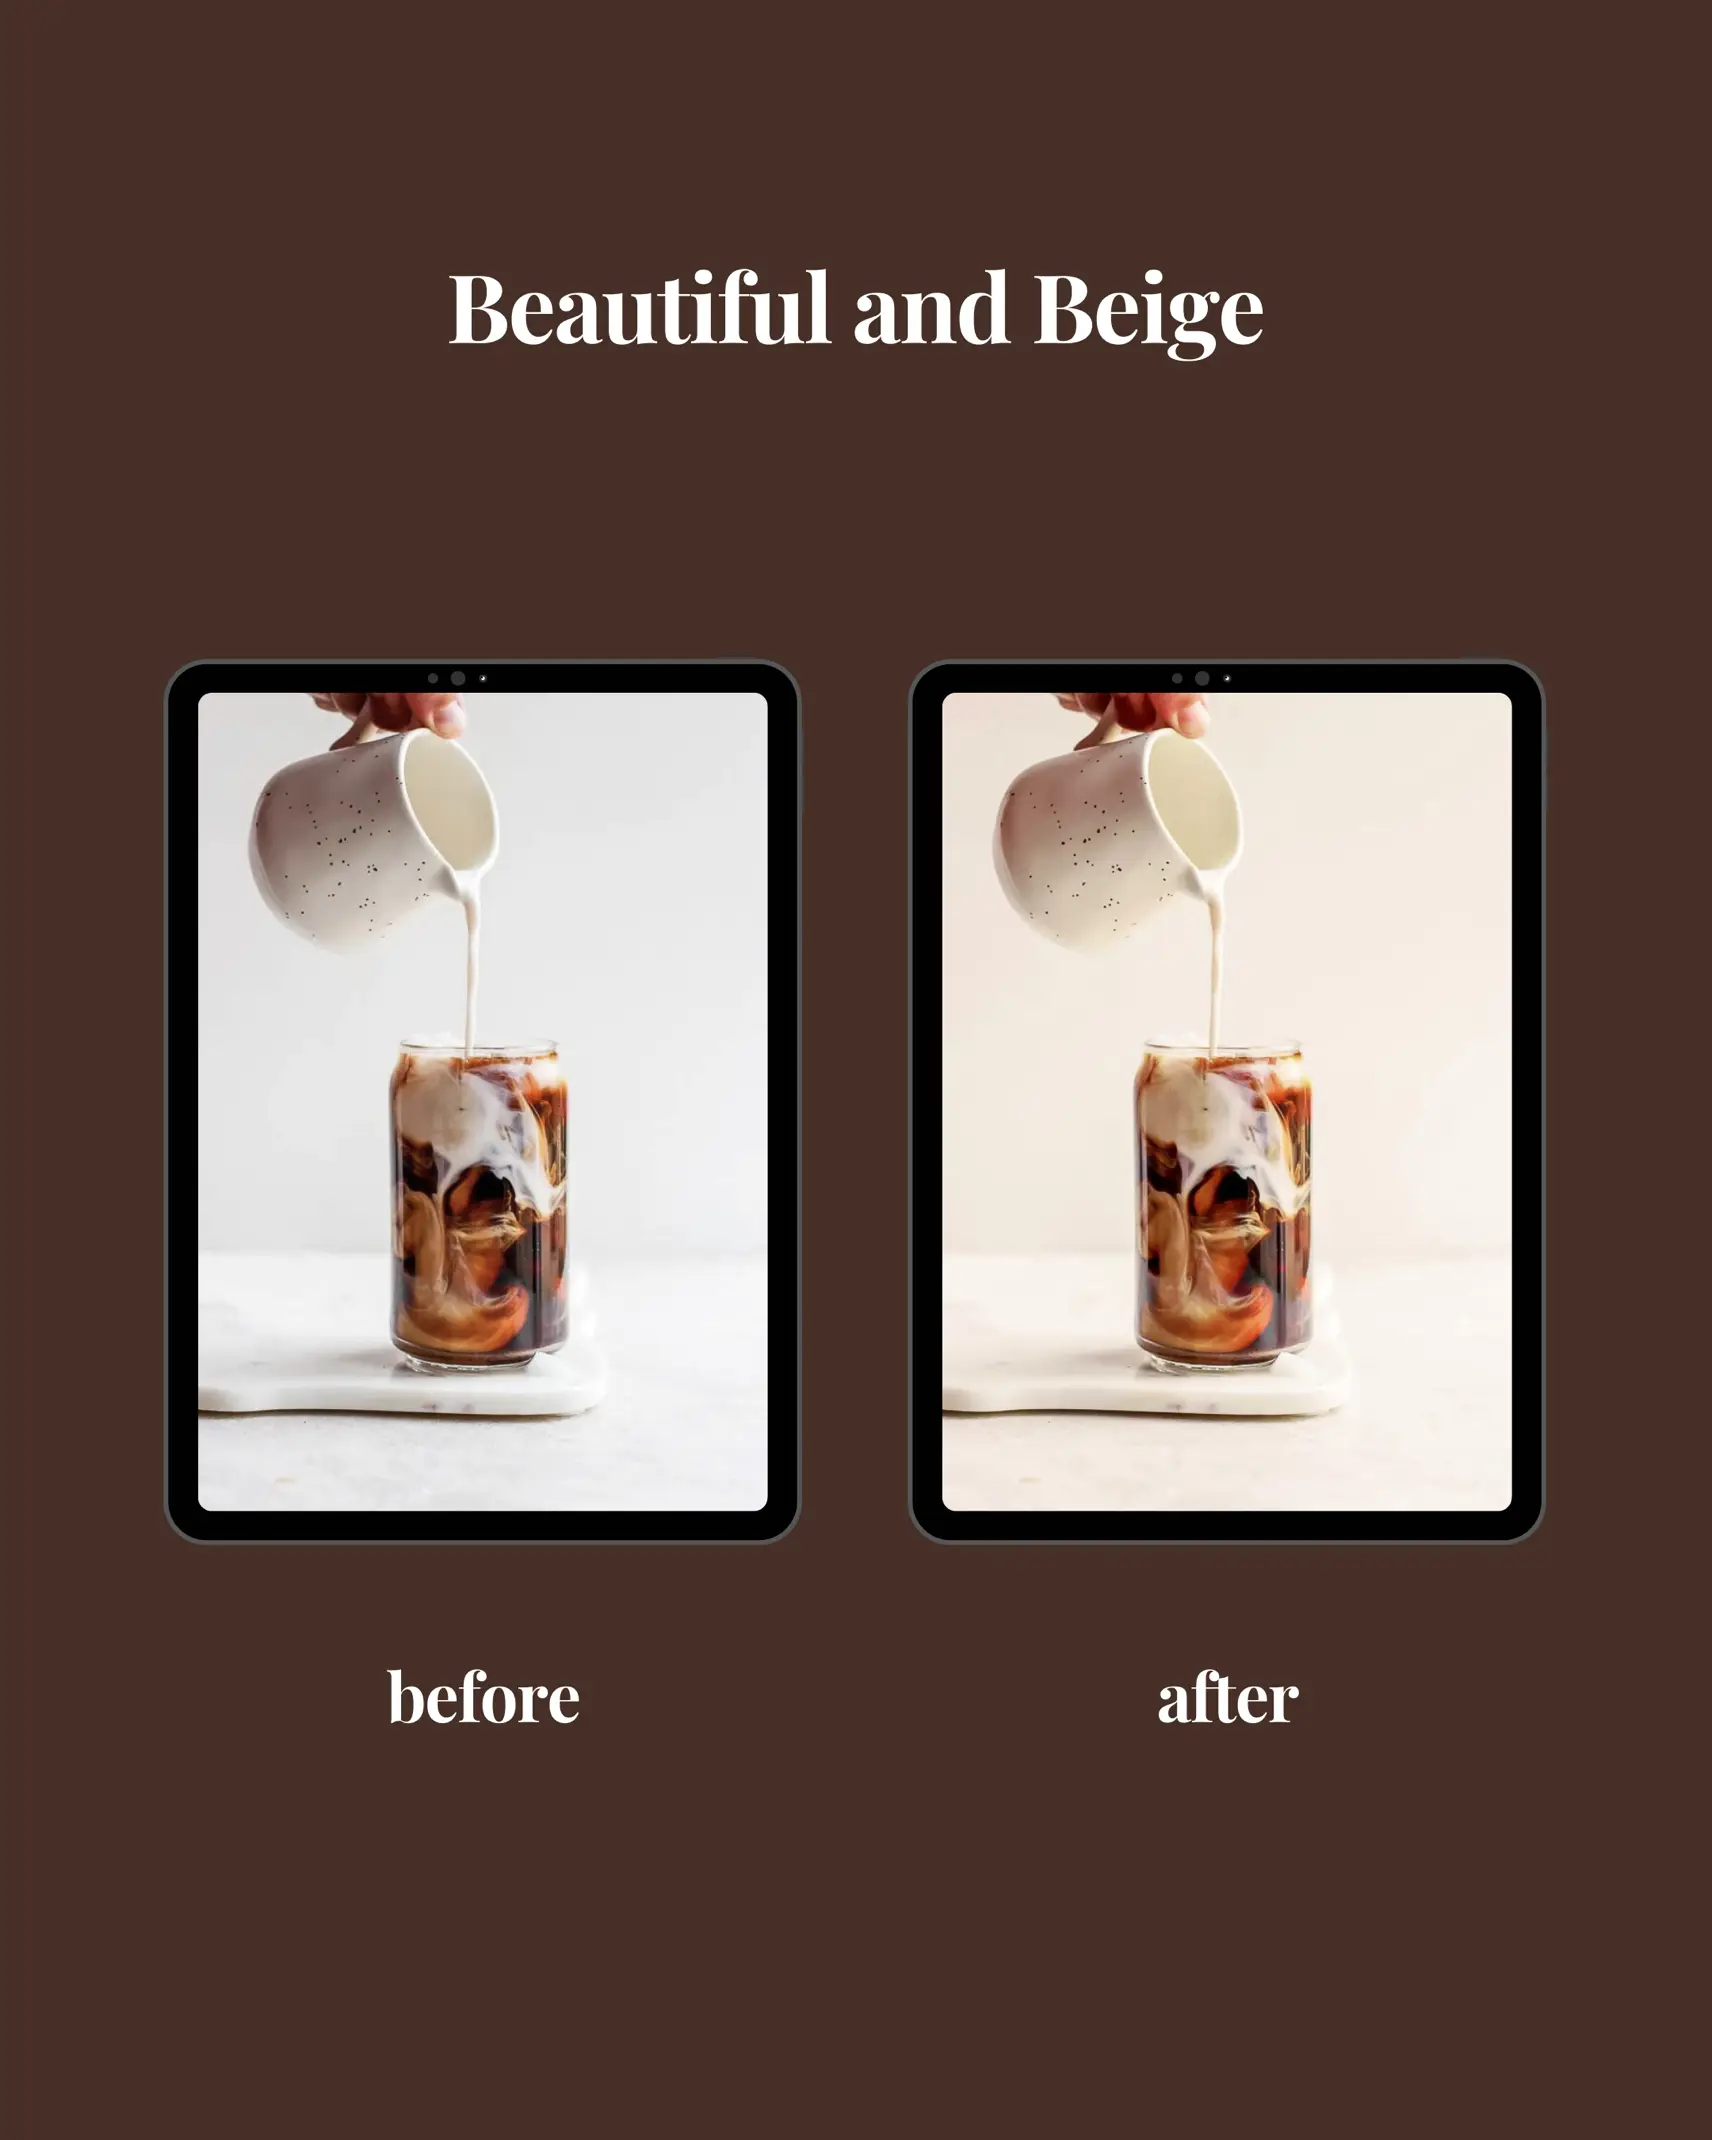  A image of a table with a before and after image of a candle.